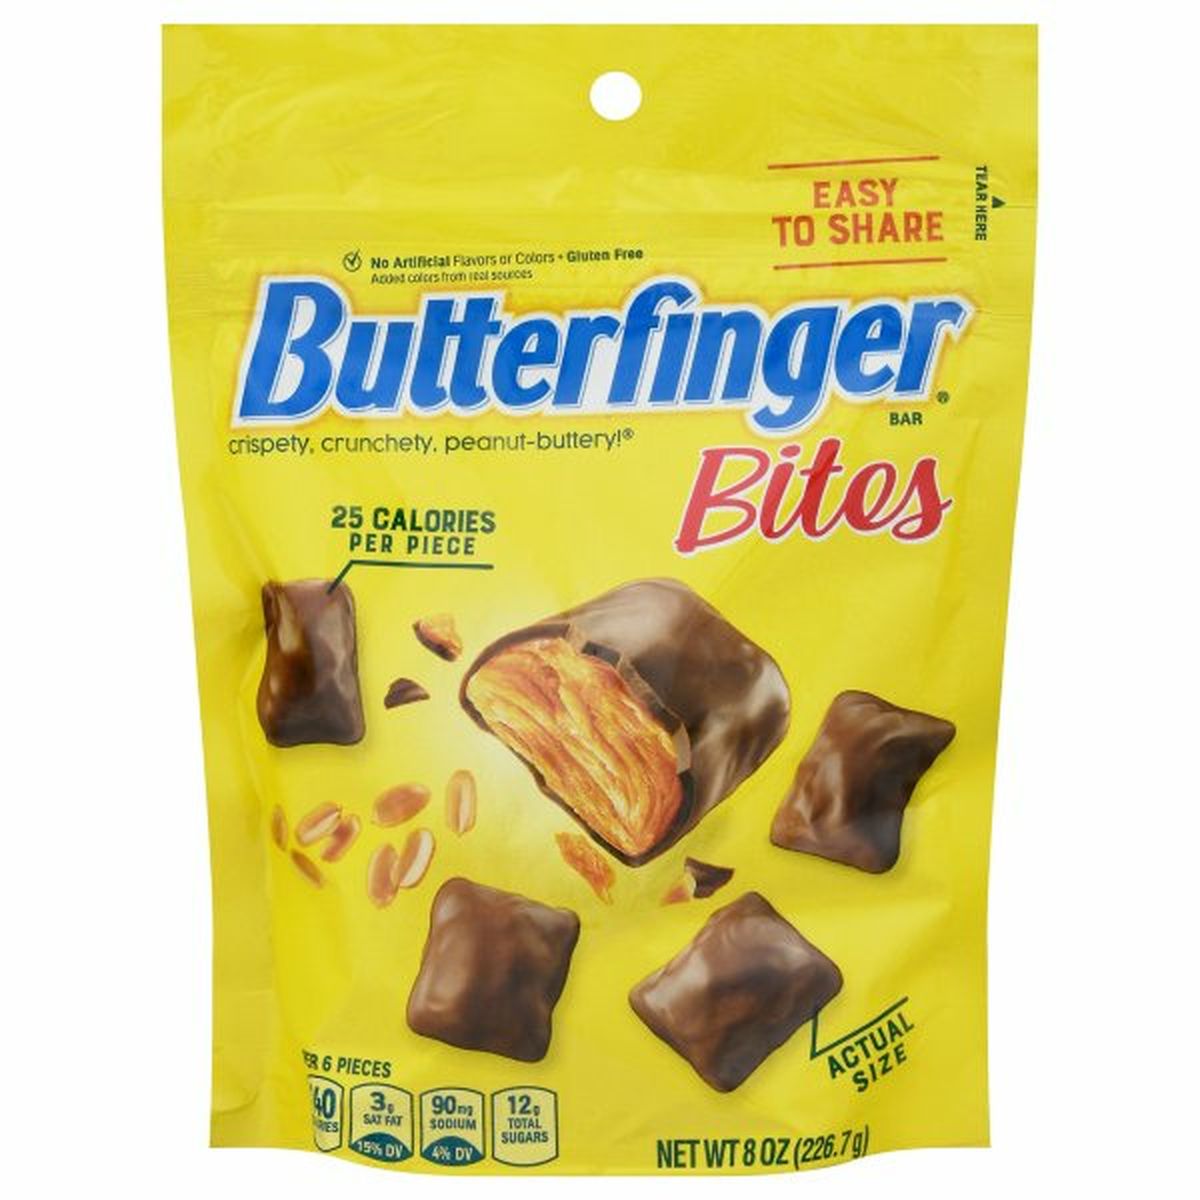 Calories in Butterfinger Candy Bar, Bites